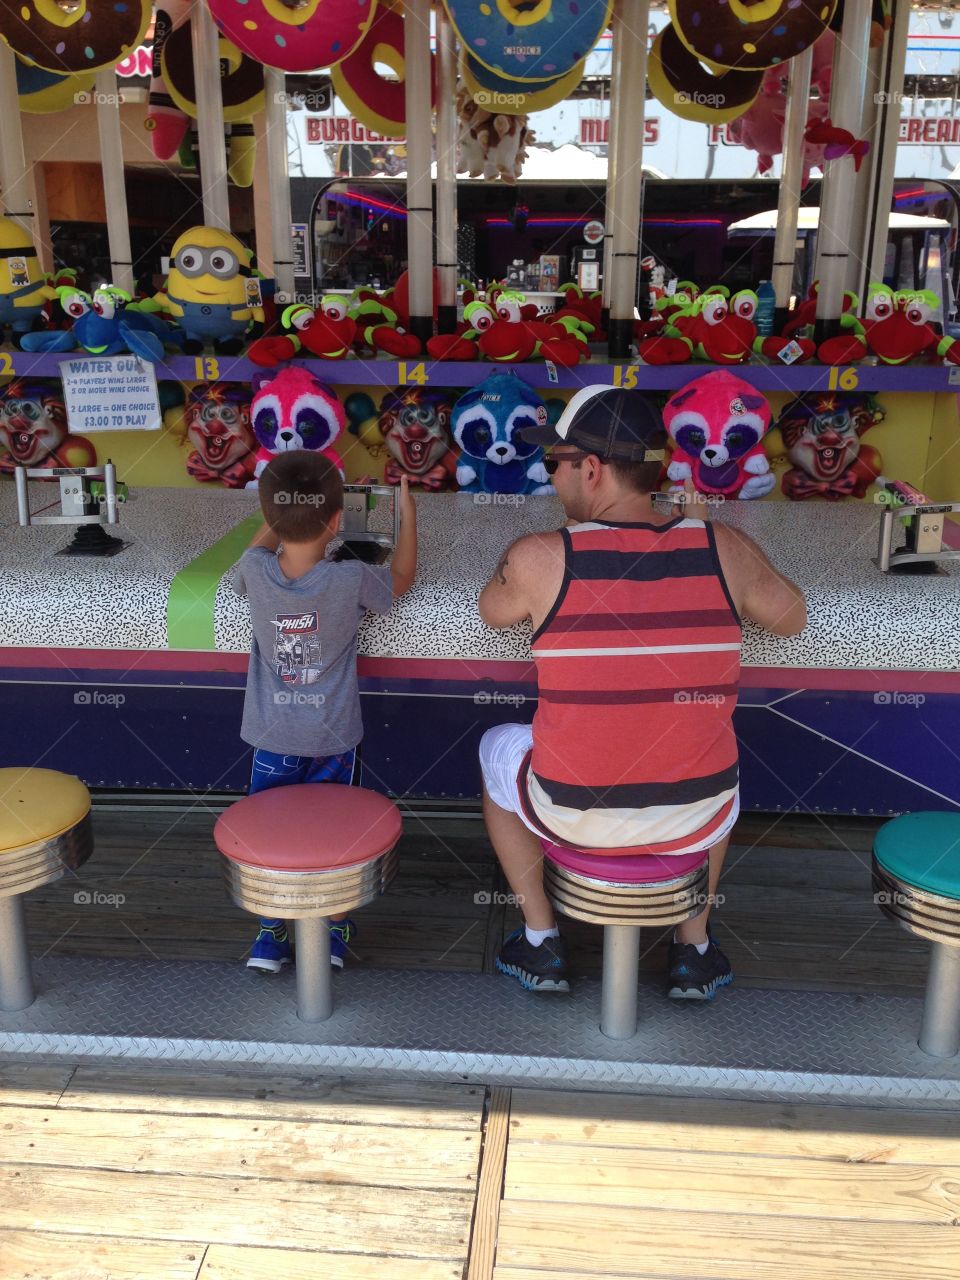 Water guns, determined to win the minion!!! Wildwood boardwalk, summer vacation! 